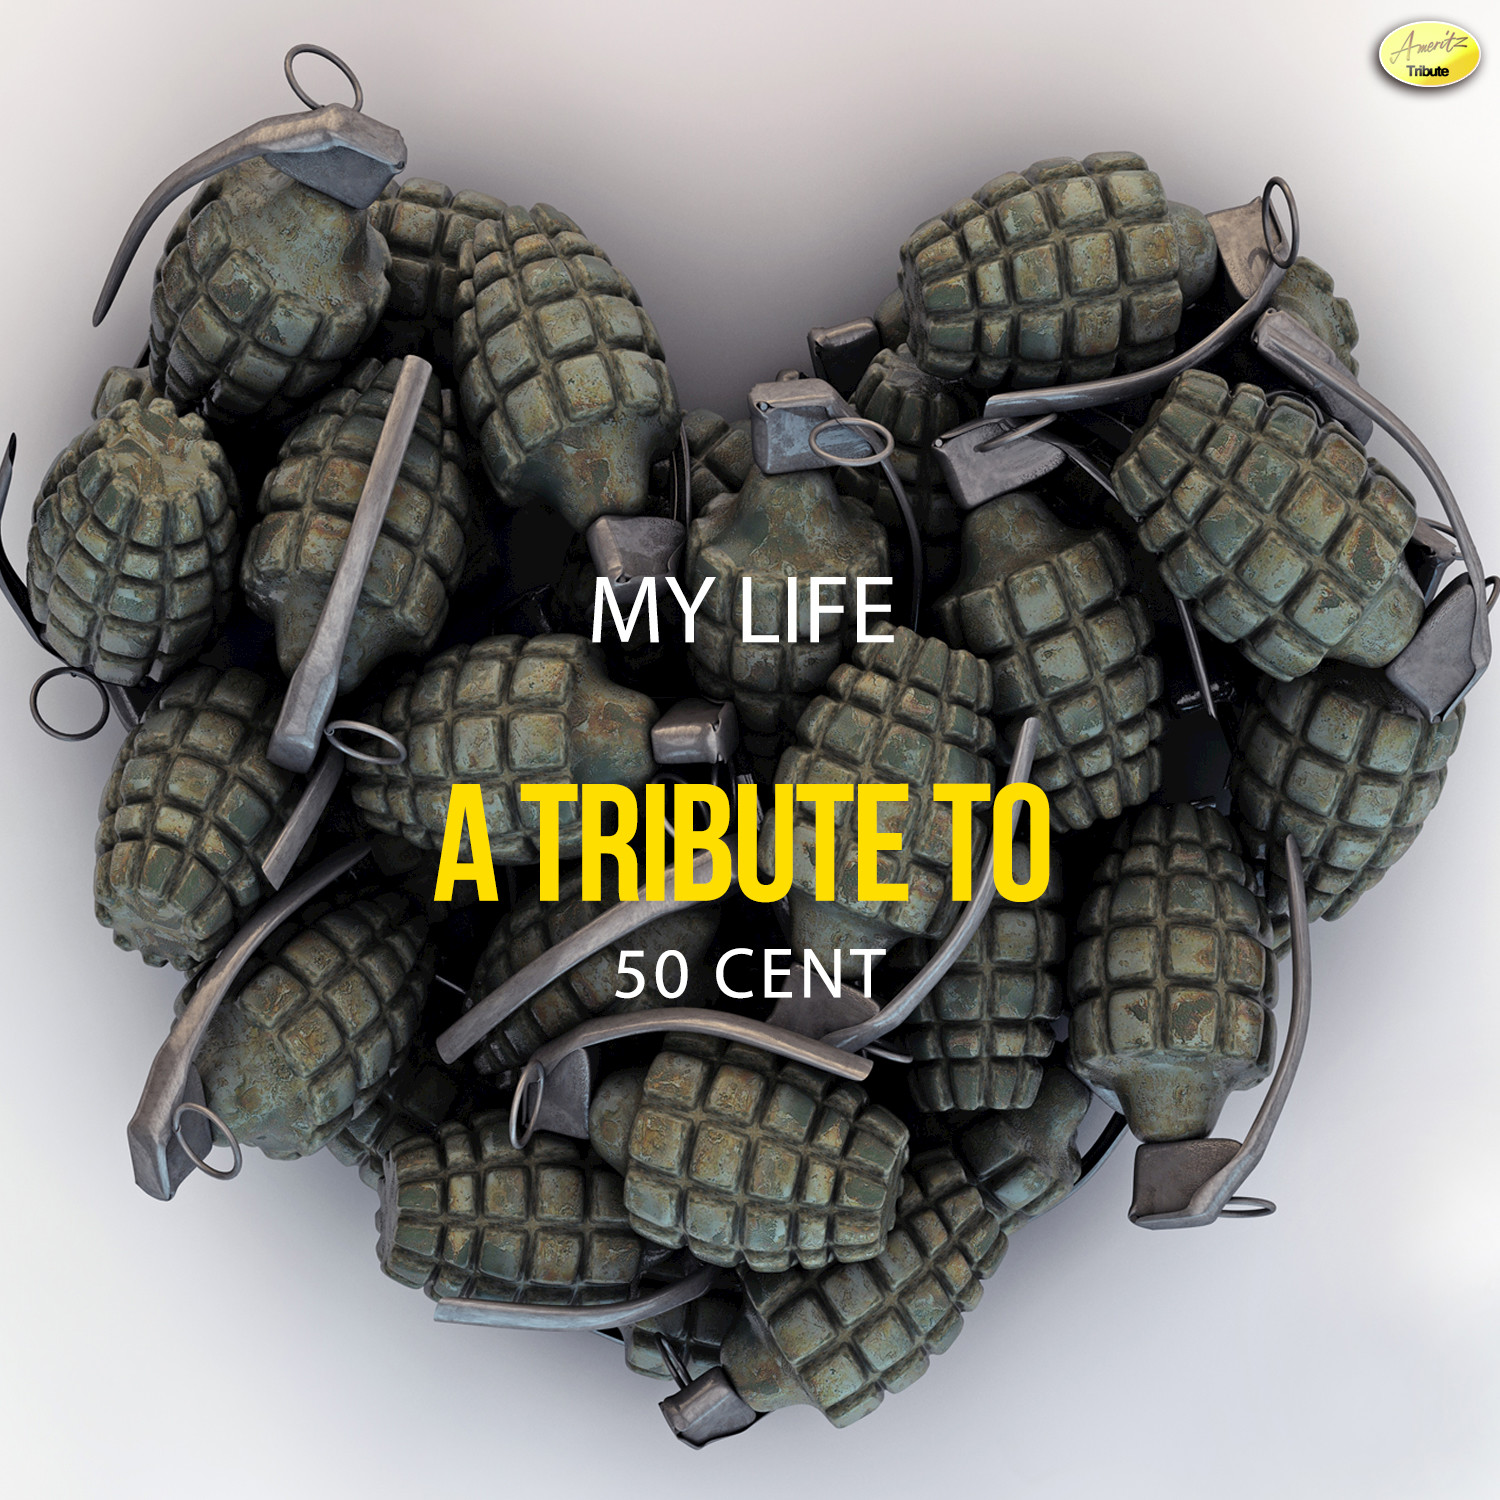 My Life - A Tribute to 50 Cent